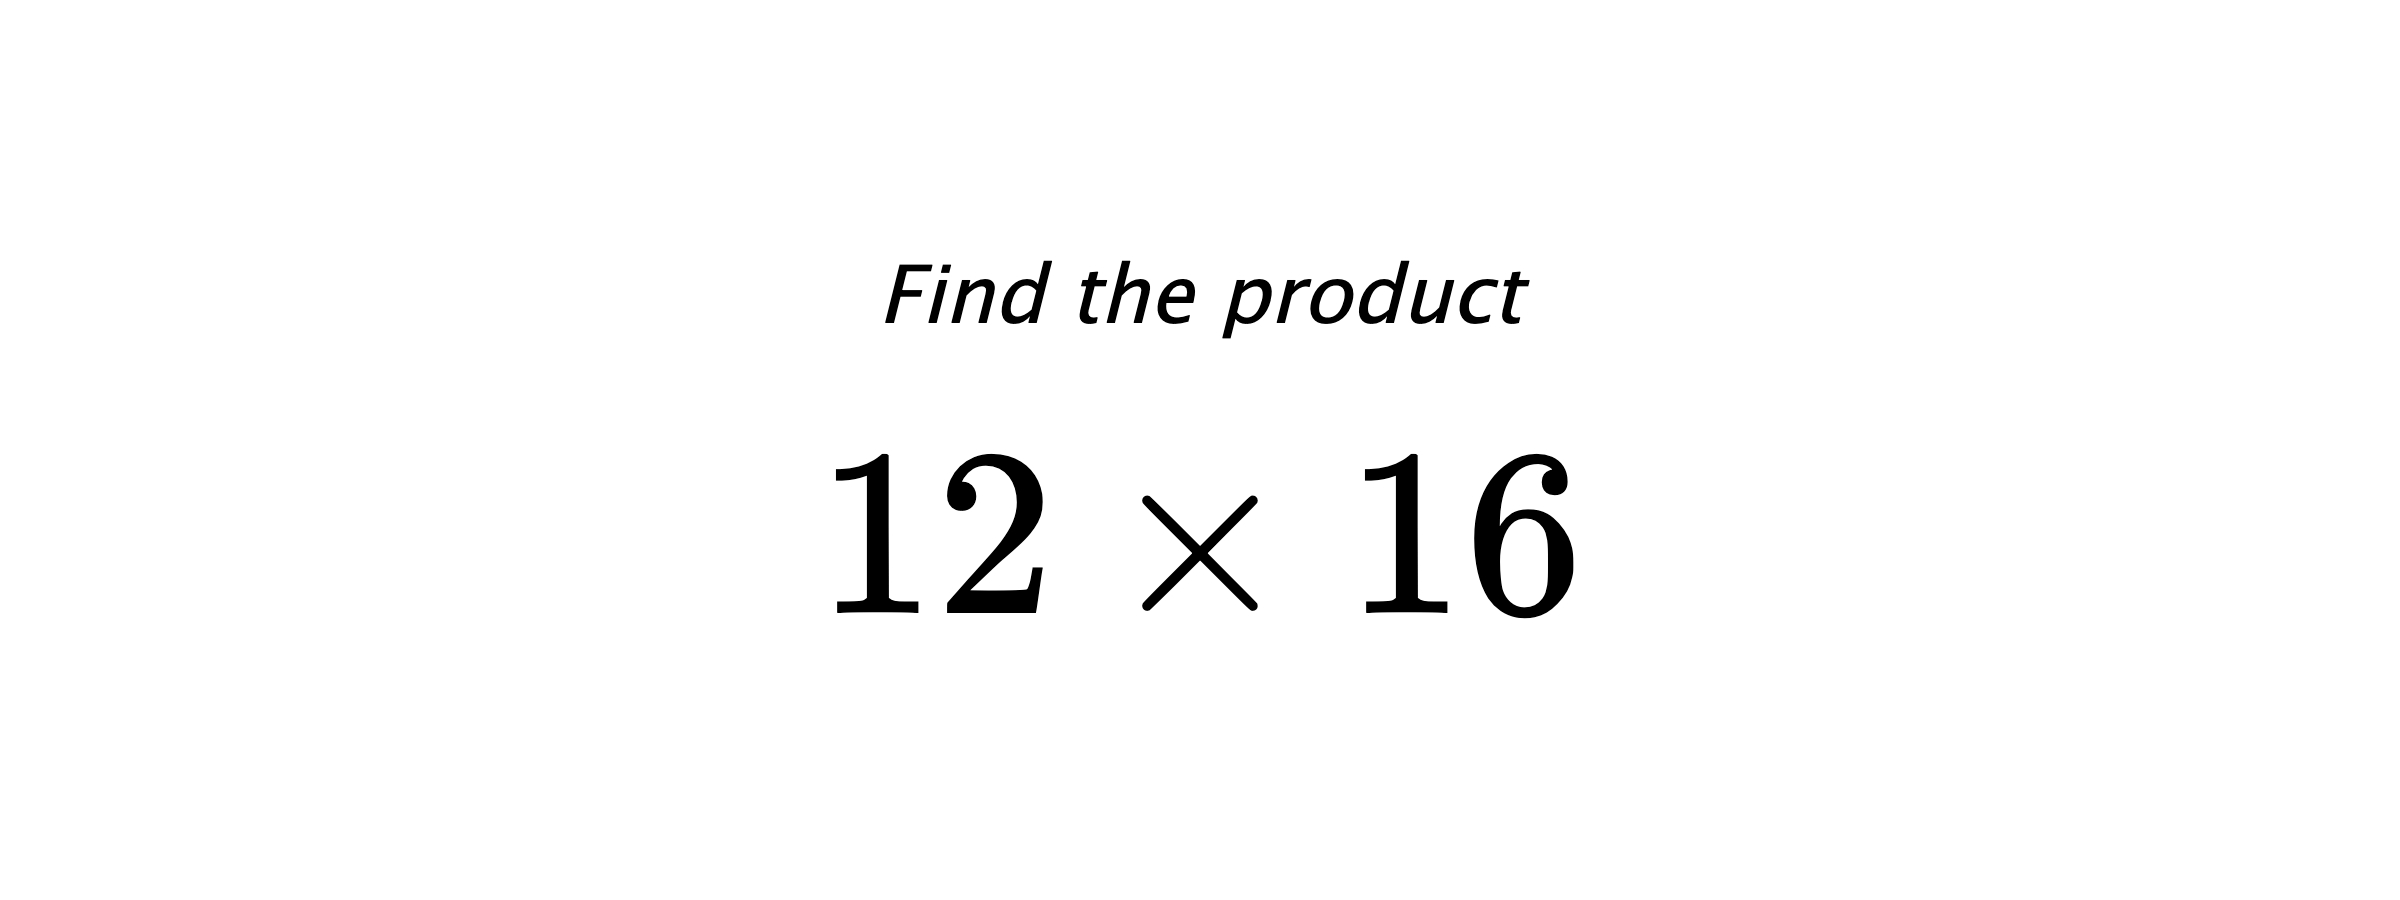 Find the product $ 12 \times 16 $